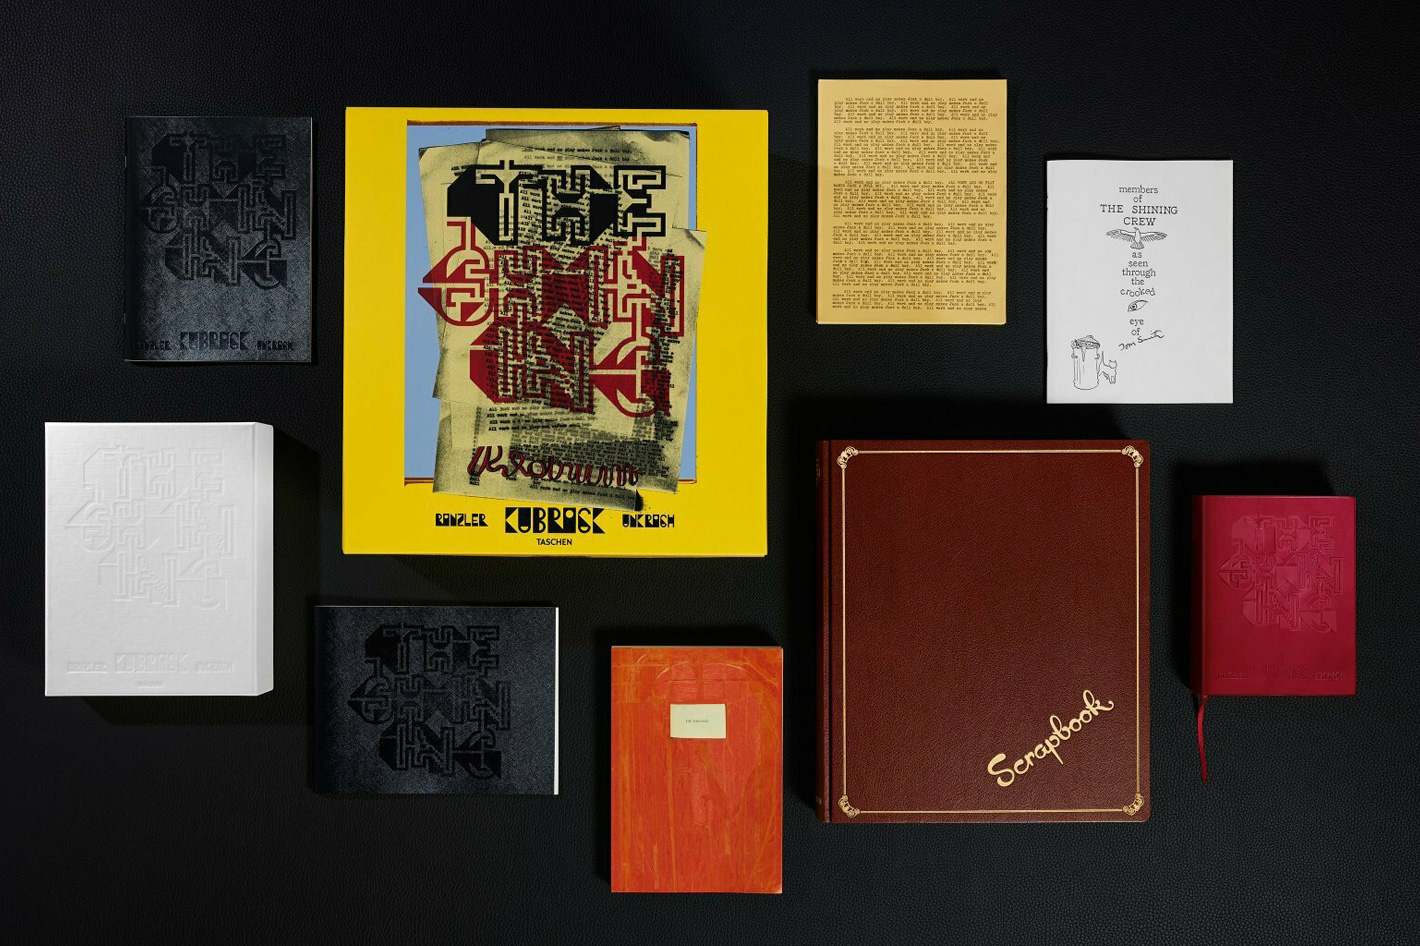 Stanley Kubrick's The Shining: horror in limited edition